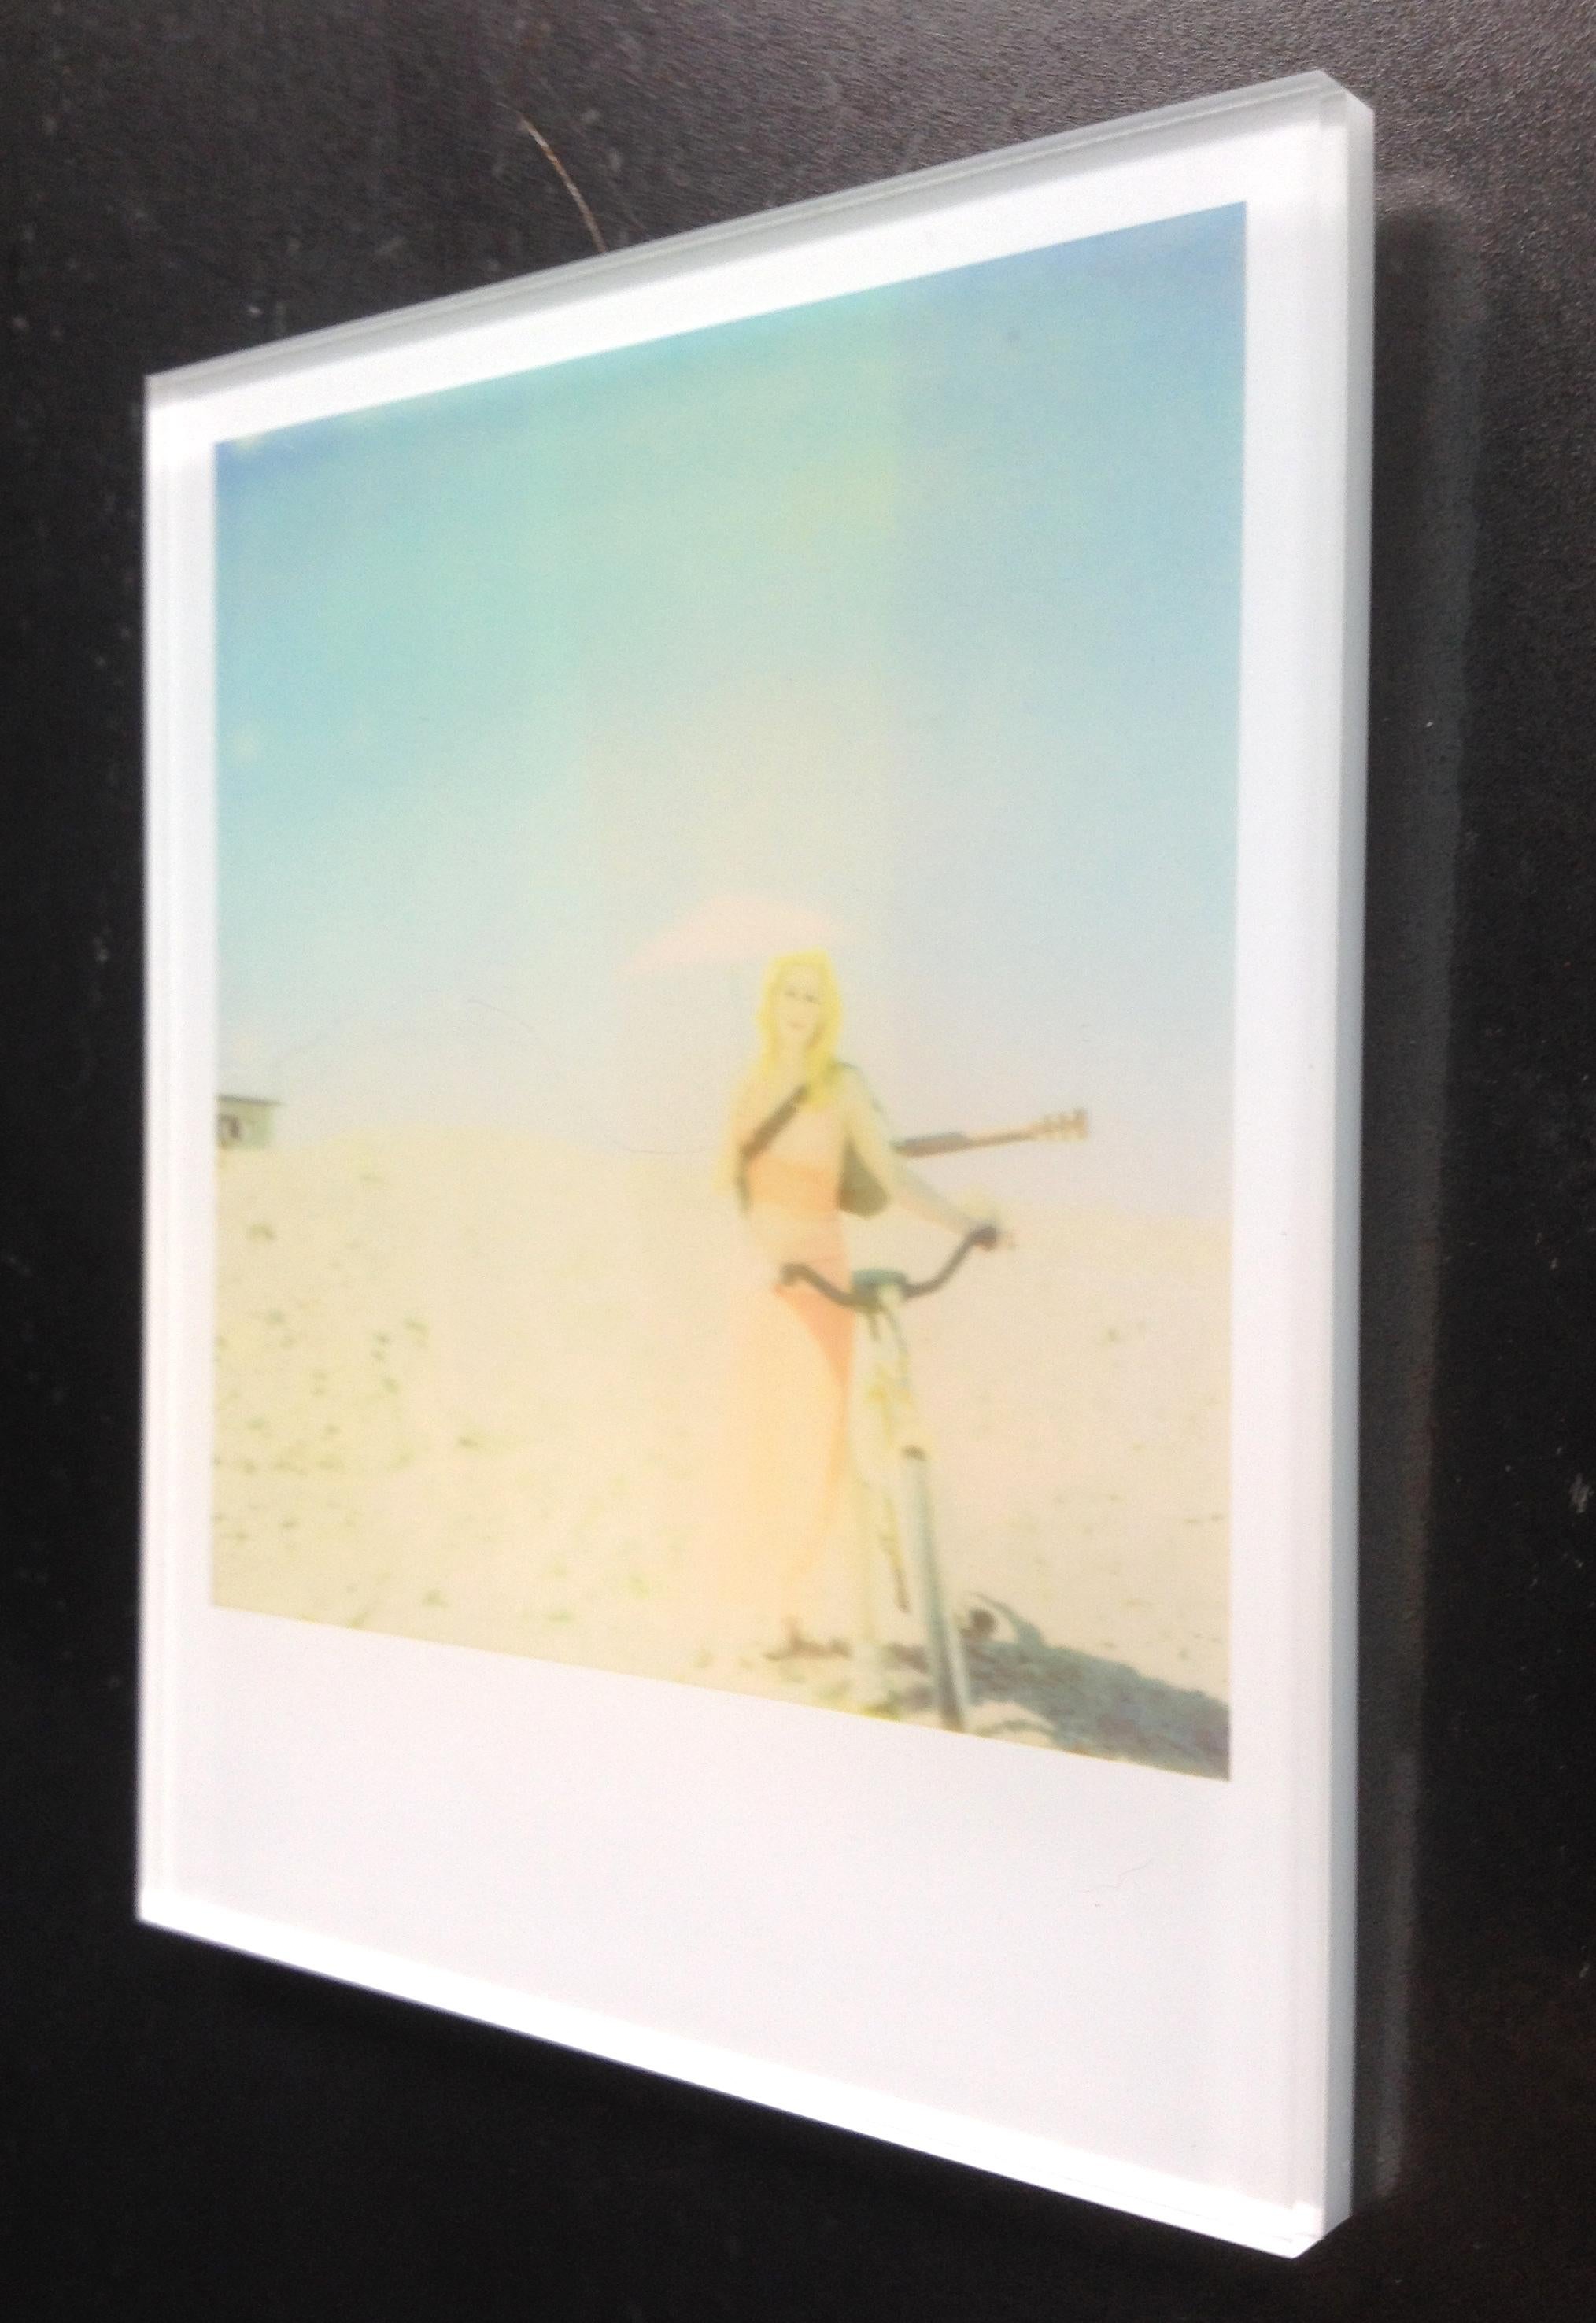 Stefanie Schneider's Minis
'Moonwalk' (29 Palms, CA), 2006
signed and signature brand on verso
Lambda digital Color Photographs based on a Polaroid

Polaroid sized open Editions 1999-2013
10.7 x 8.8cm (Image 7.9x7.7cm)
mounted: sandwiched in between